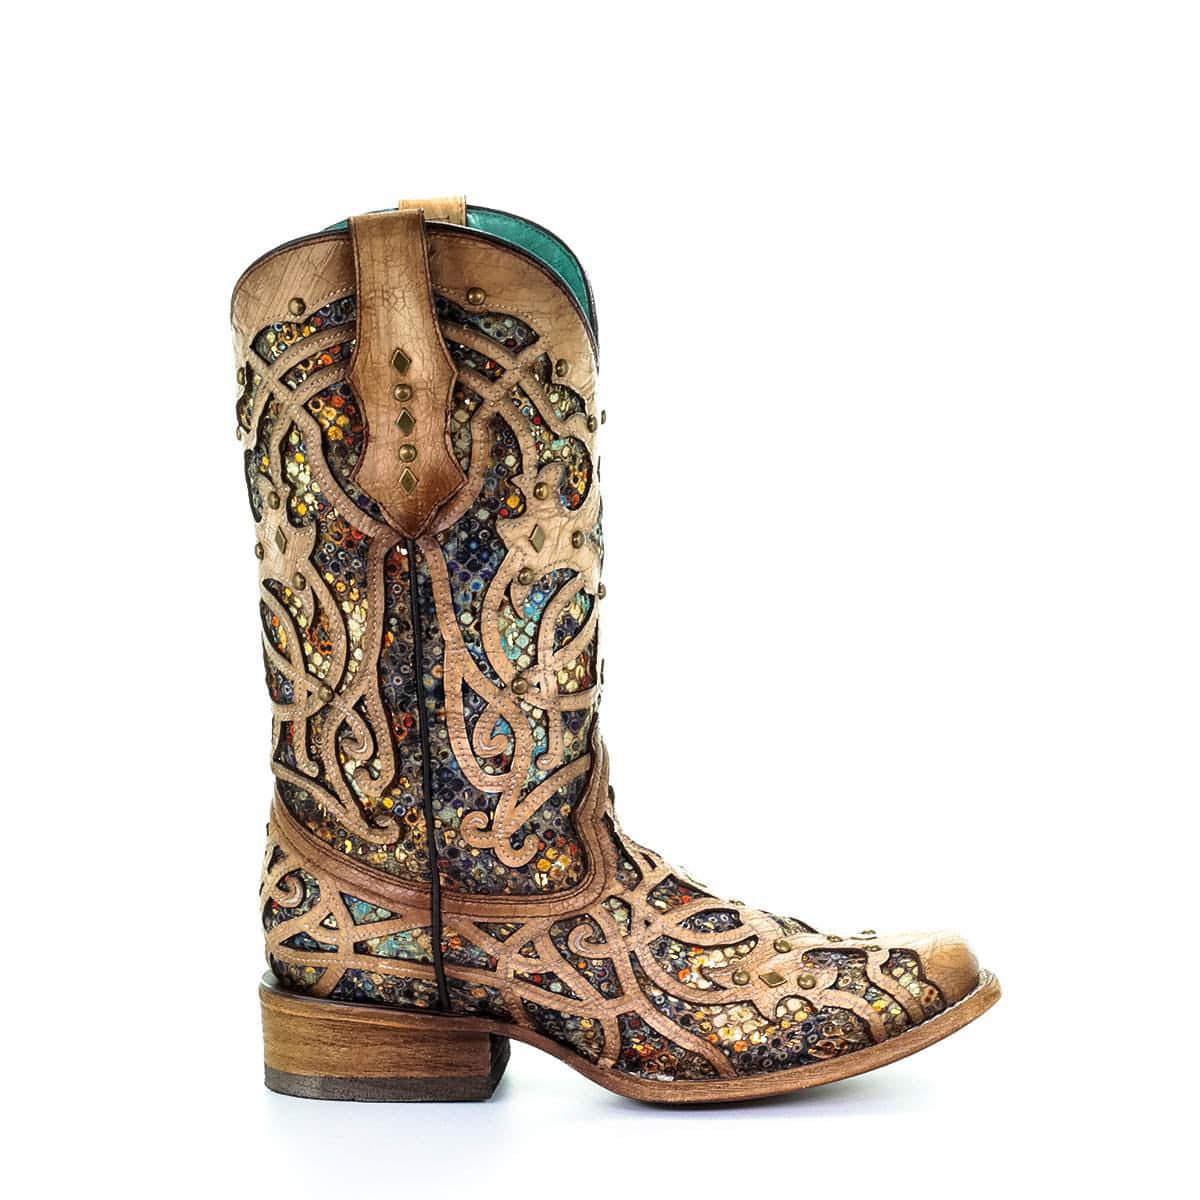 Corral Women's Inlay Square Toe Western Boots